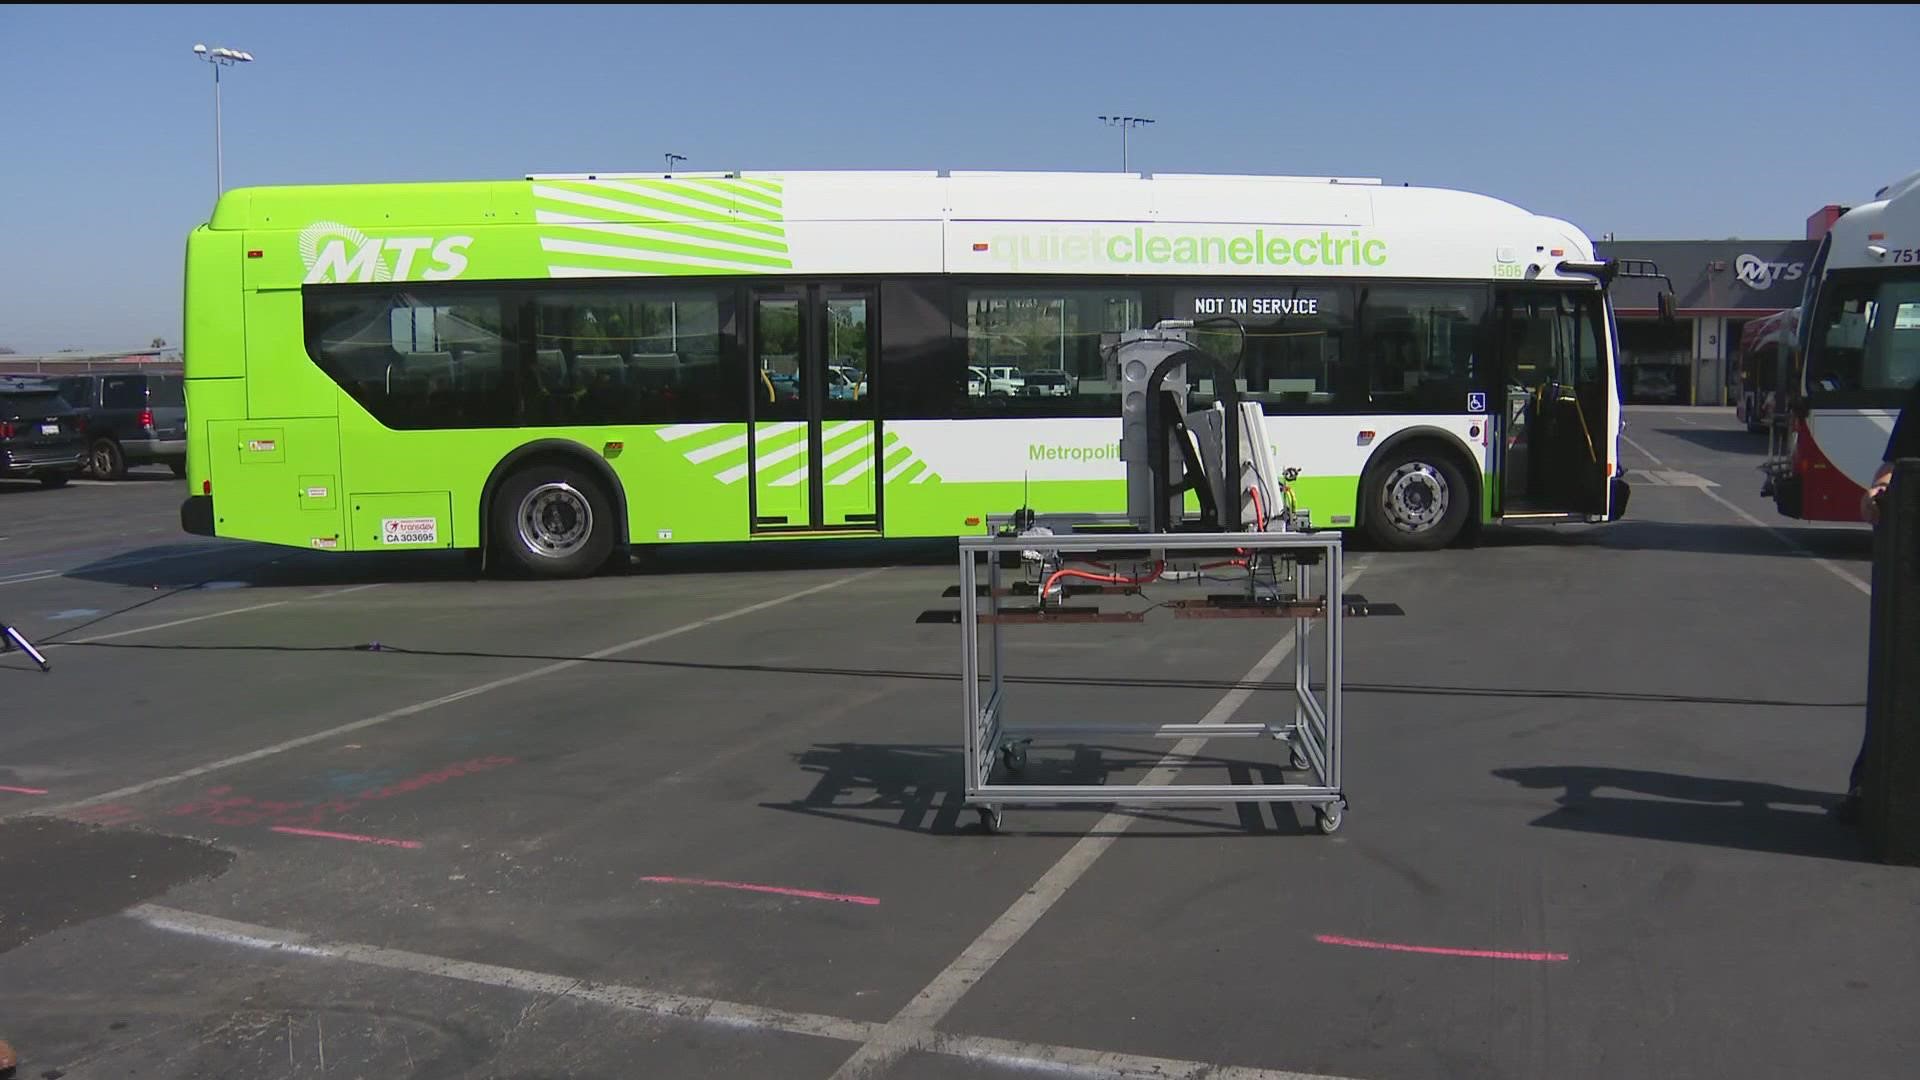 City leaders say the project is apart of the effort to make the city more “green.” MTS hopes to accomplish a goal of creating a bus fleet with zero emissions by 2040